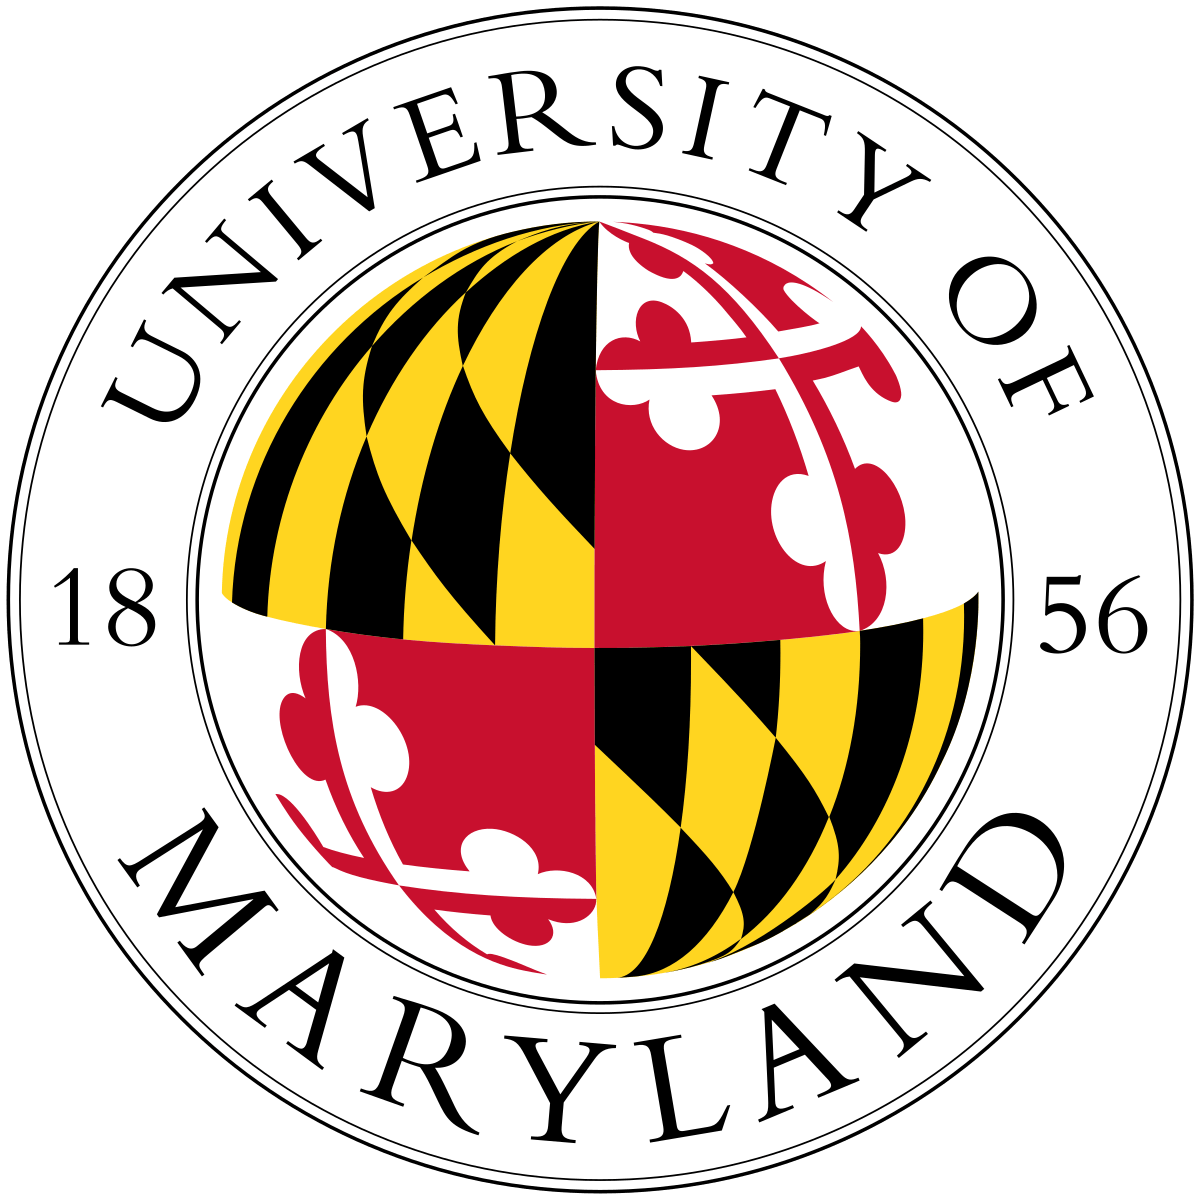 Most Popular College Logo - University of Maryland, College Park